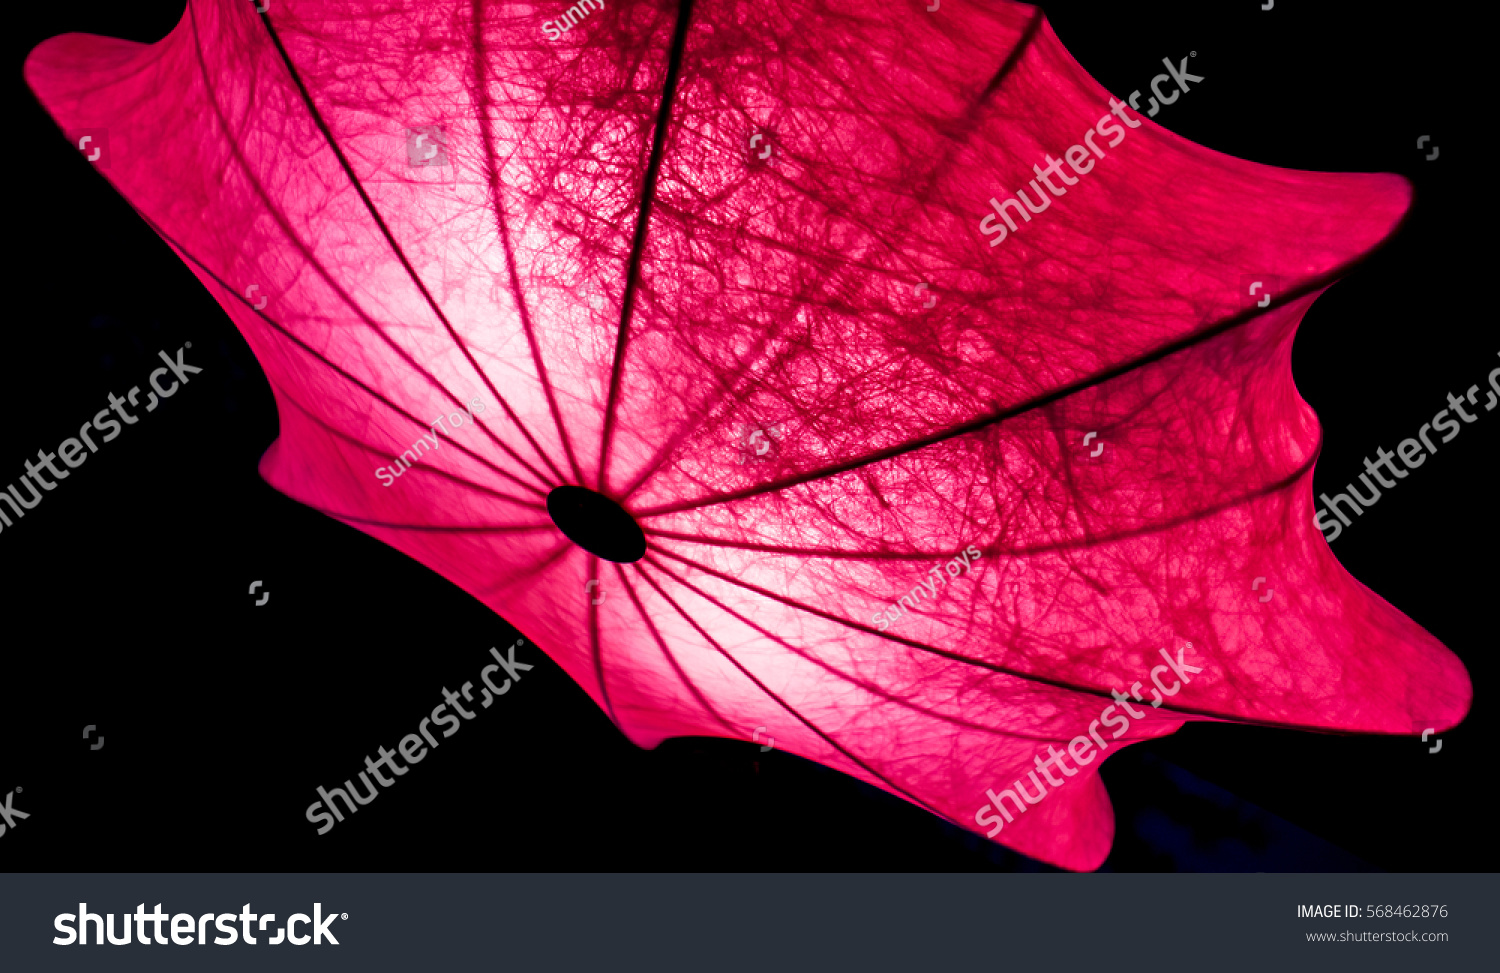 black umbrella with red inside